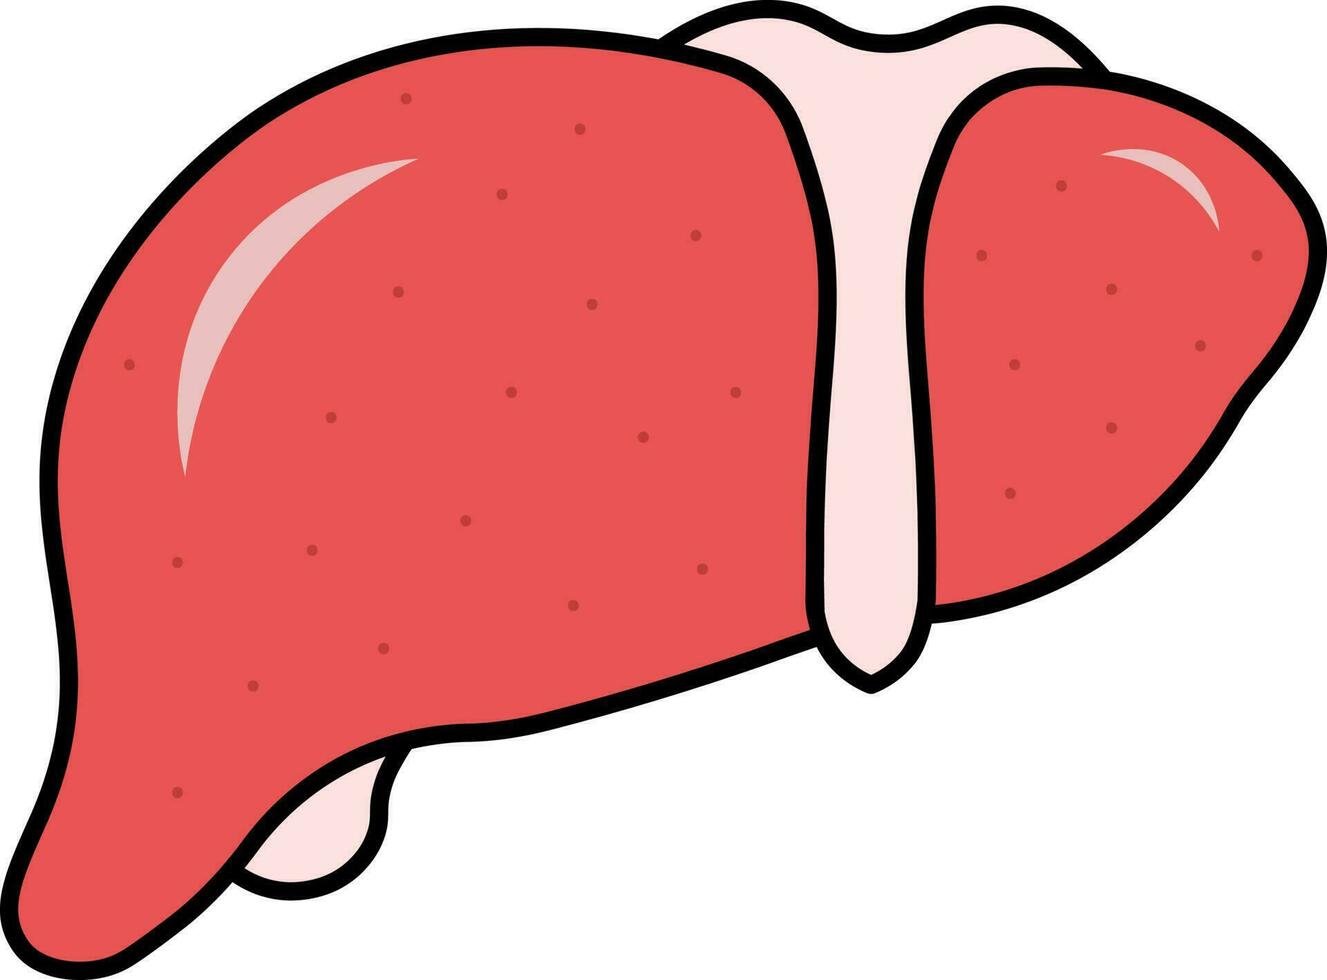 Red Liver Anatomy Icon In Flat Style. vector